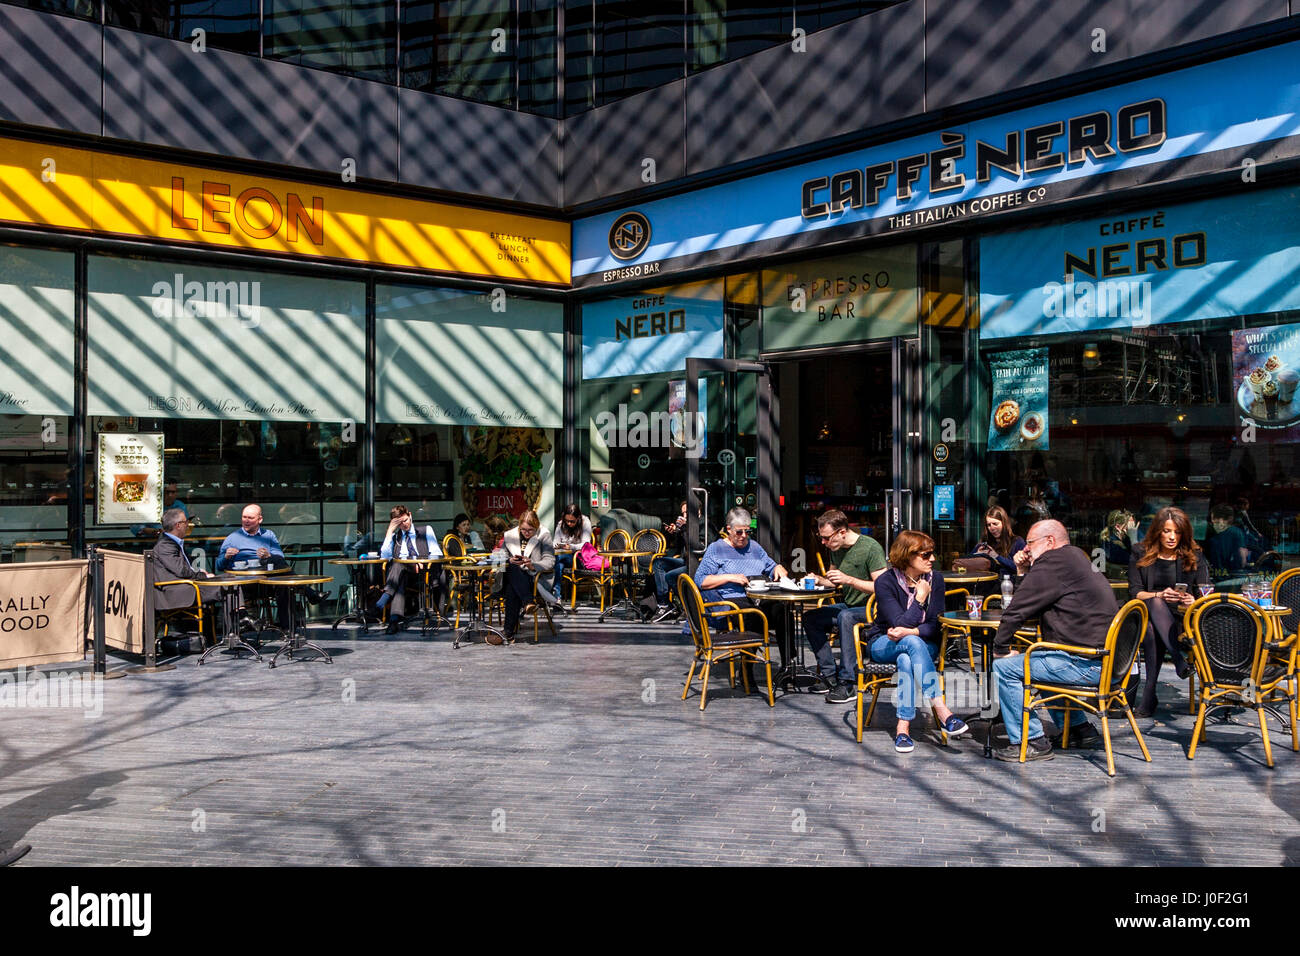 People Sitting Outside Cafes At The More London Development, London, England Stock Photo